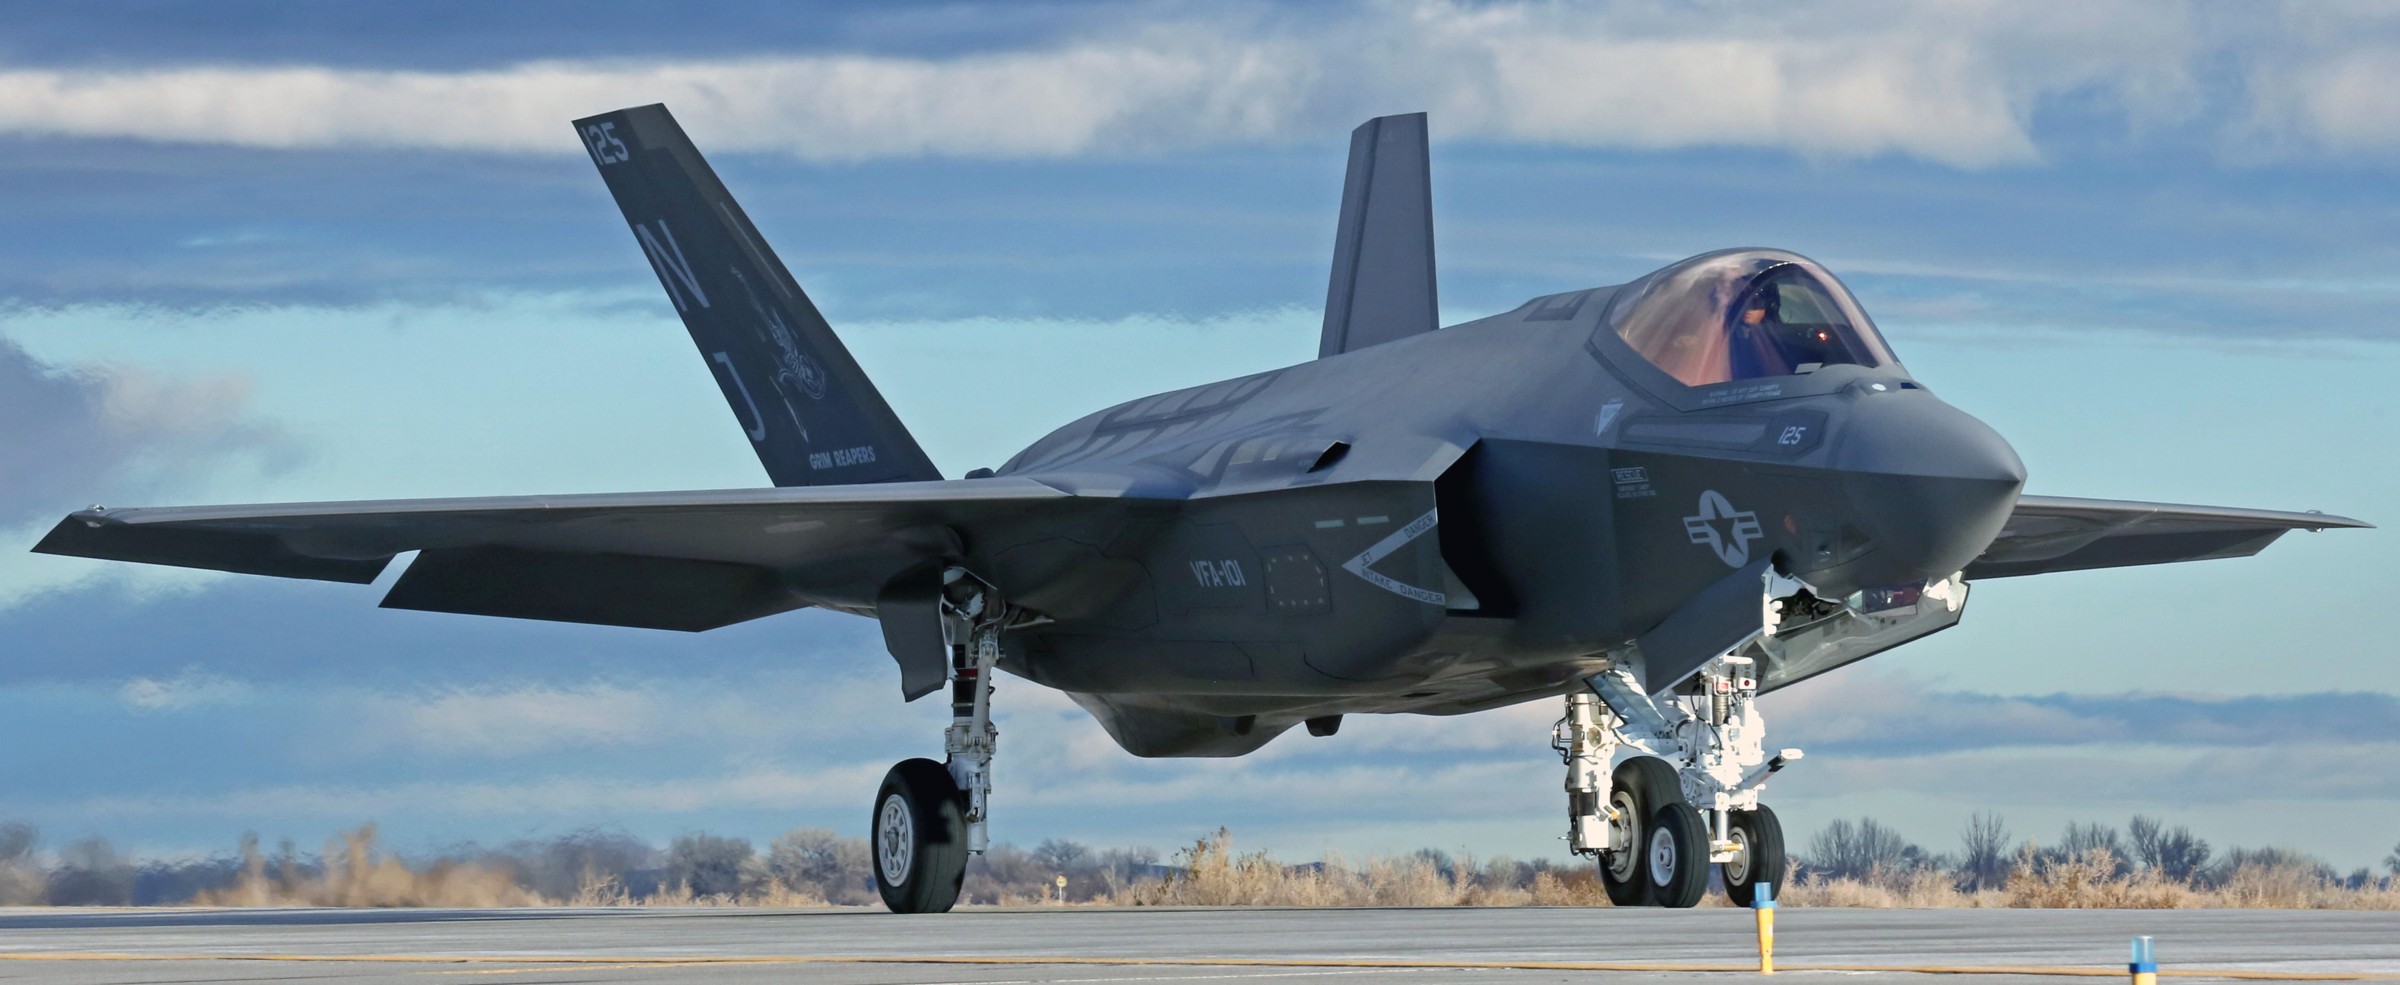 vfa-101 grim reapers strike fighter squadron us navy f-35c lightning jsf frs 19 nas fallon nevada